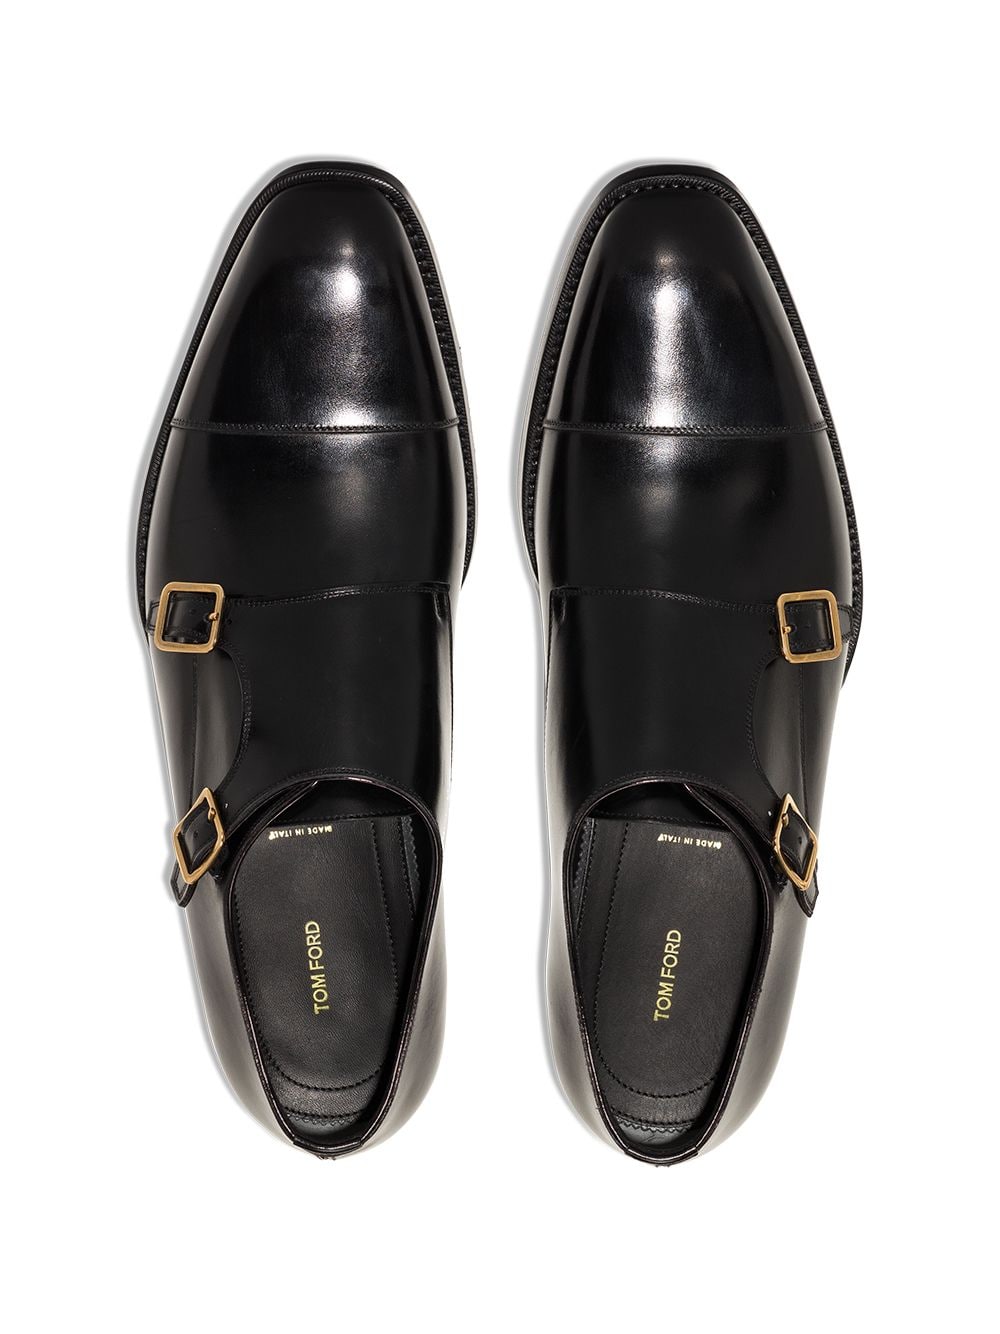 TOM FORD buckle-strap Leather Monk Shoes - Farfetch